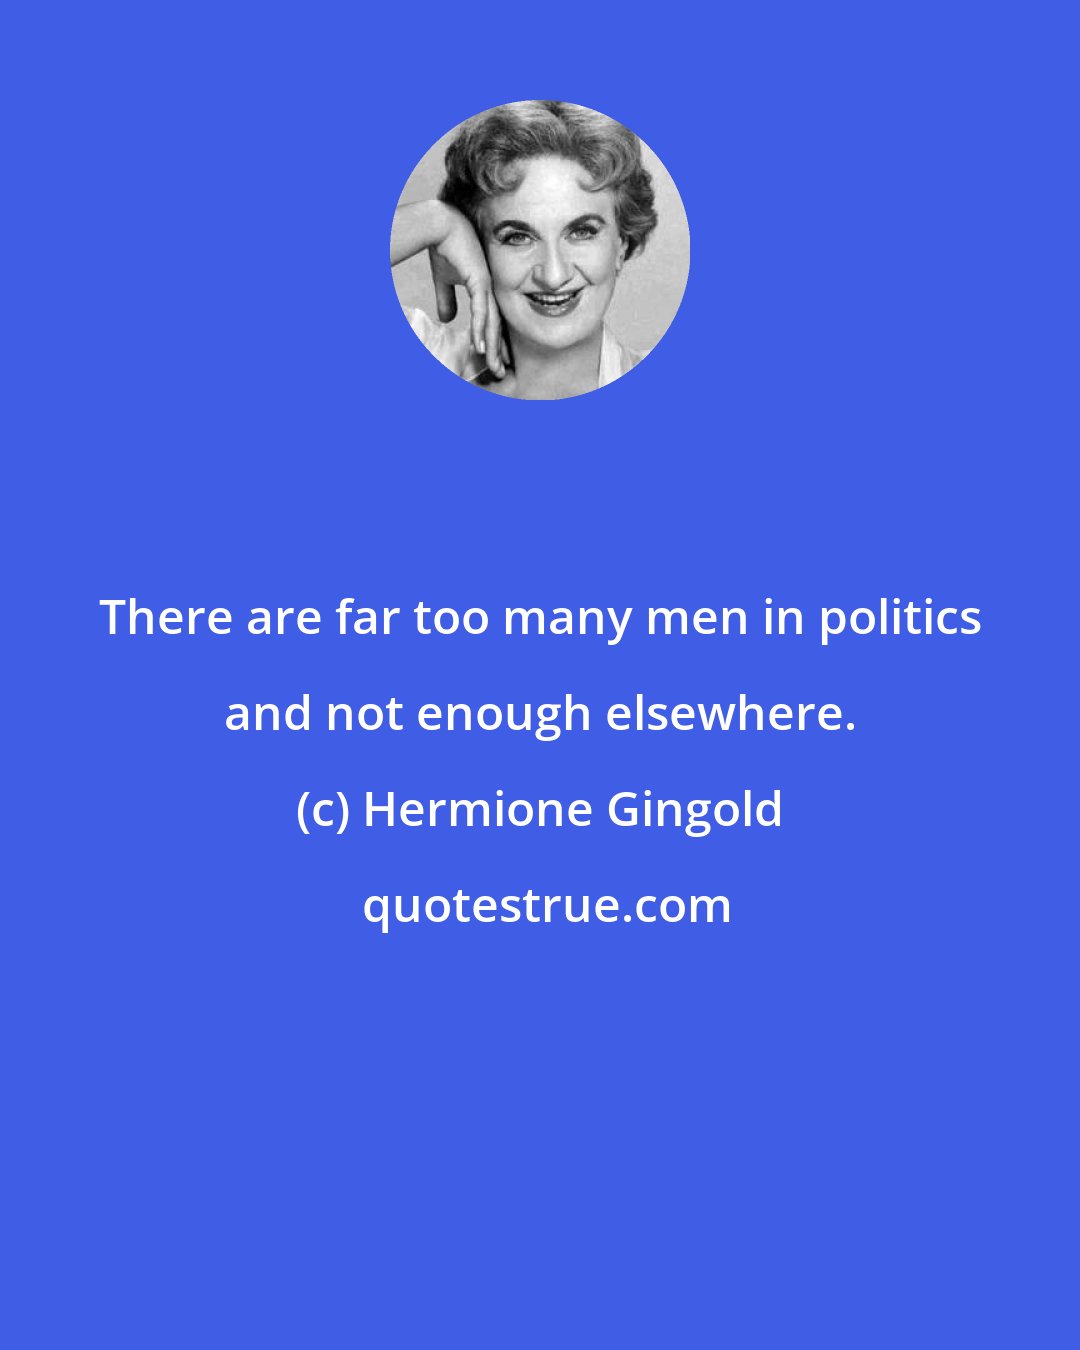 Hermione Gingold: There are far too many men in politics and not enough elsewhere.